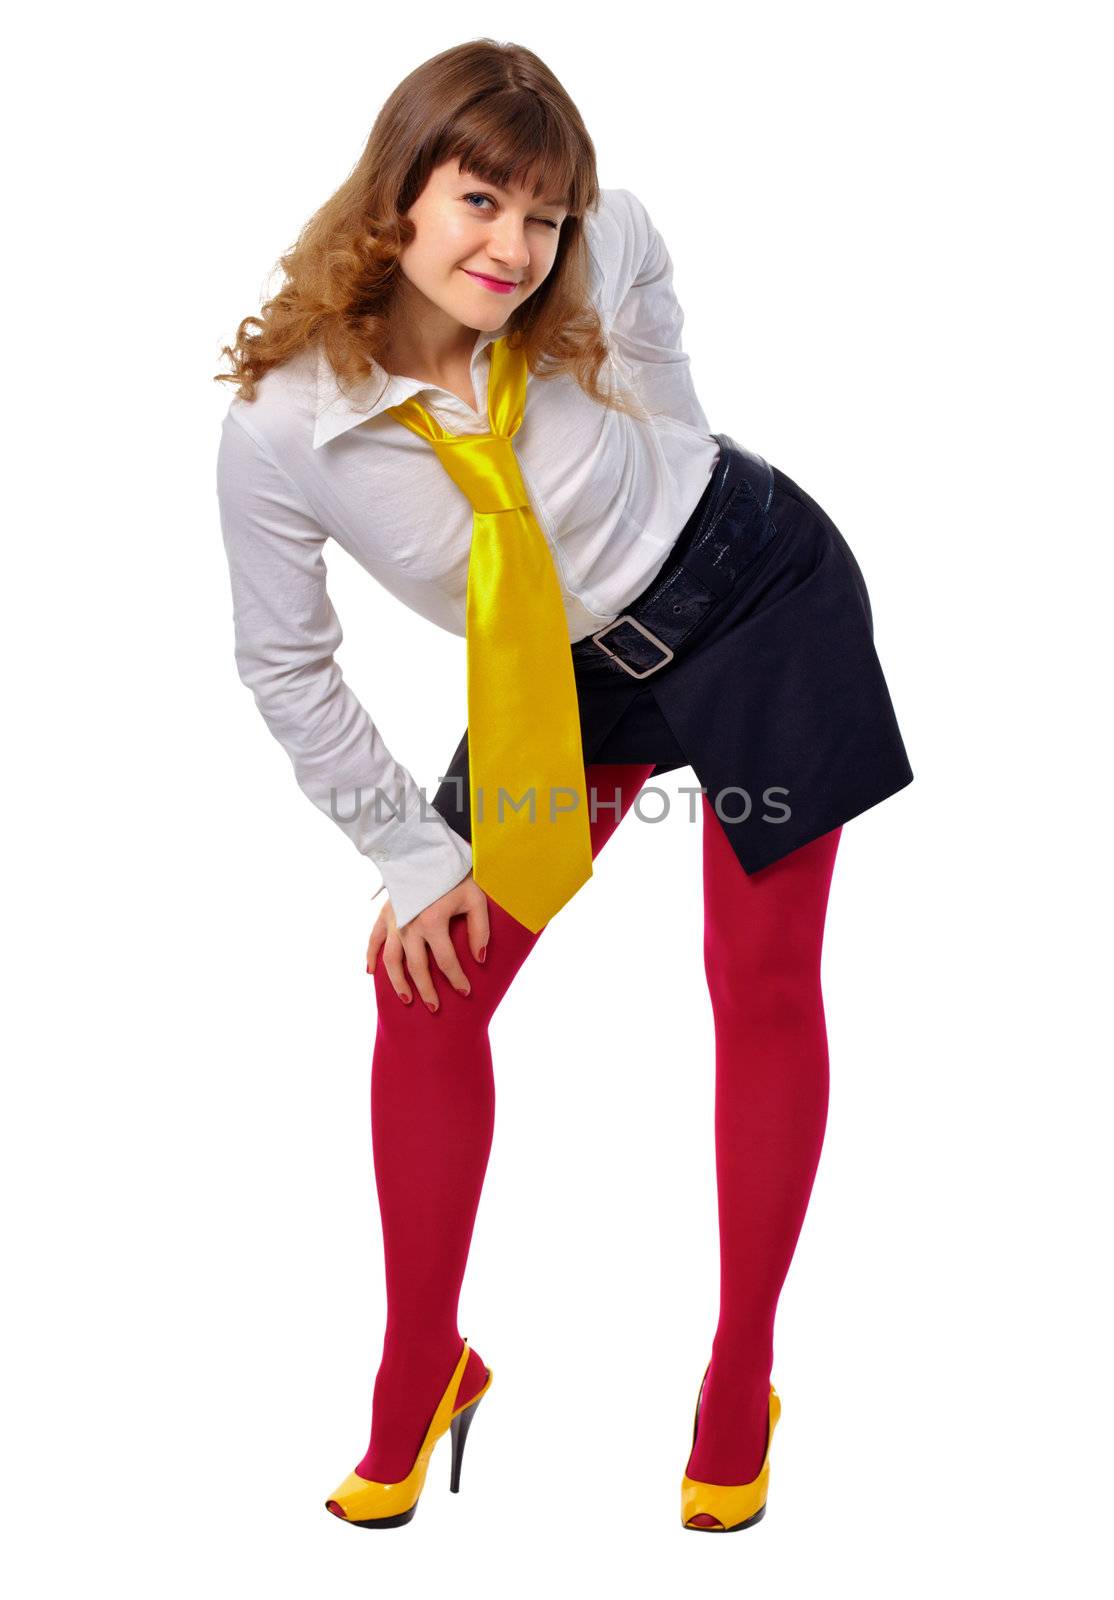 Young girl in red stockings and a yellow shoes isolated on white background